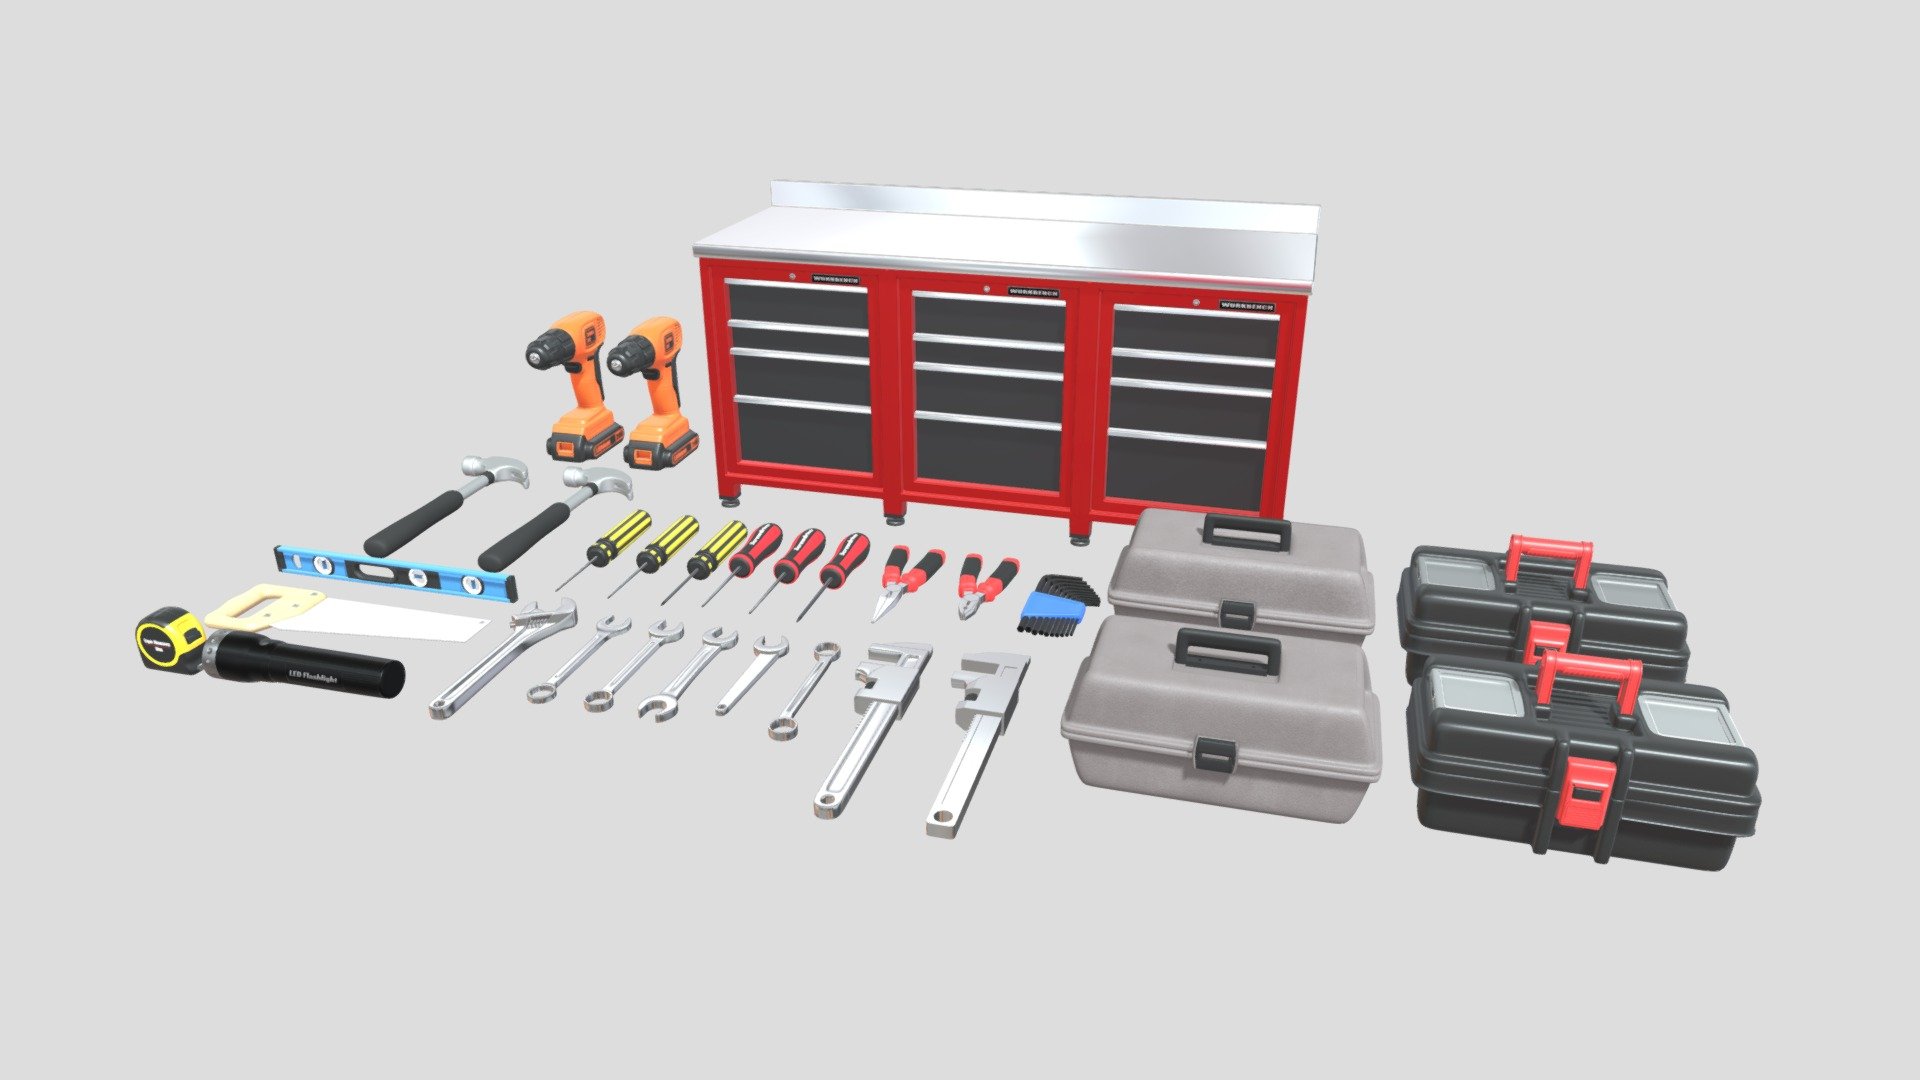 Tools and Workbench Collection that was made using Blender. This is a collection of several different tool and storage 3D models. It includes models ranging from low poly to high poly.

Features:




Includes GLTF file type instructions

Models were made using the metalness workflow and use PBR textures in PNG format

Models have been manually UV unwrapped

Blend files include pre-applied textures as well as camera and lighting setups

Extra lighting has been provided by included HDR maps downloaded from HDRi Haven

Includes native blend files for each model

All models have been exported in 4 file formats (FBX, OBJ, GLTF/GLB, DAE/Collada)

Included Textures:




AO, Diffuse(Alpha), Roughness, Gloss, Metallic, Normal

UVLayout

The source file that is uploaded is for demonstration use and is uploaded in FBX format. In the additional file you will find all model exports and the textures that go along with them 3d model